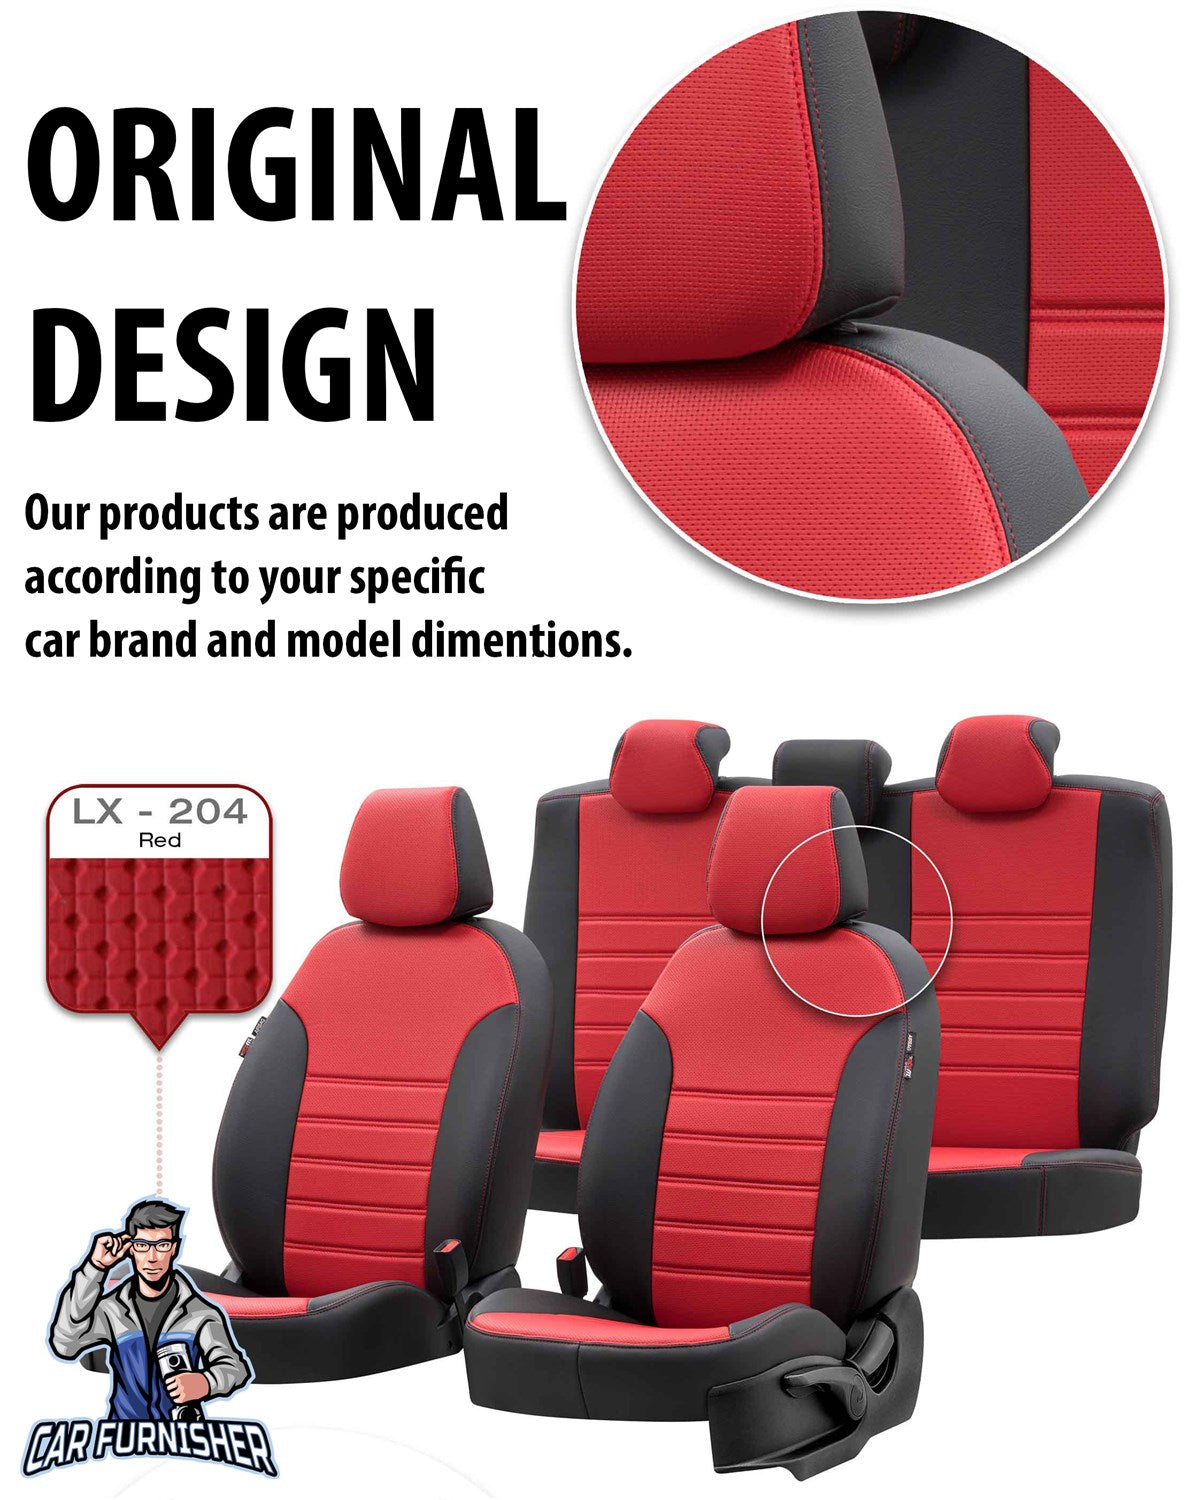 Citroen Jumper Seat Covers New York Leather Design Smoked Leather